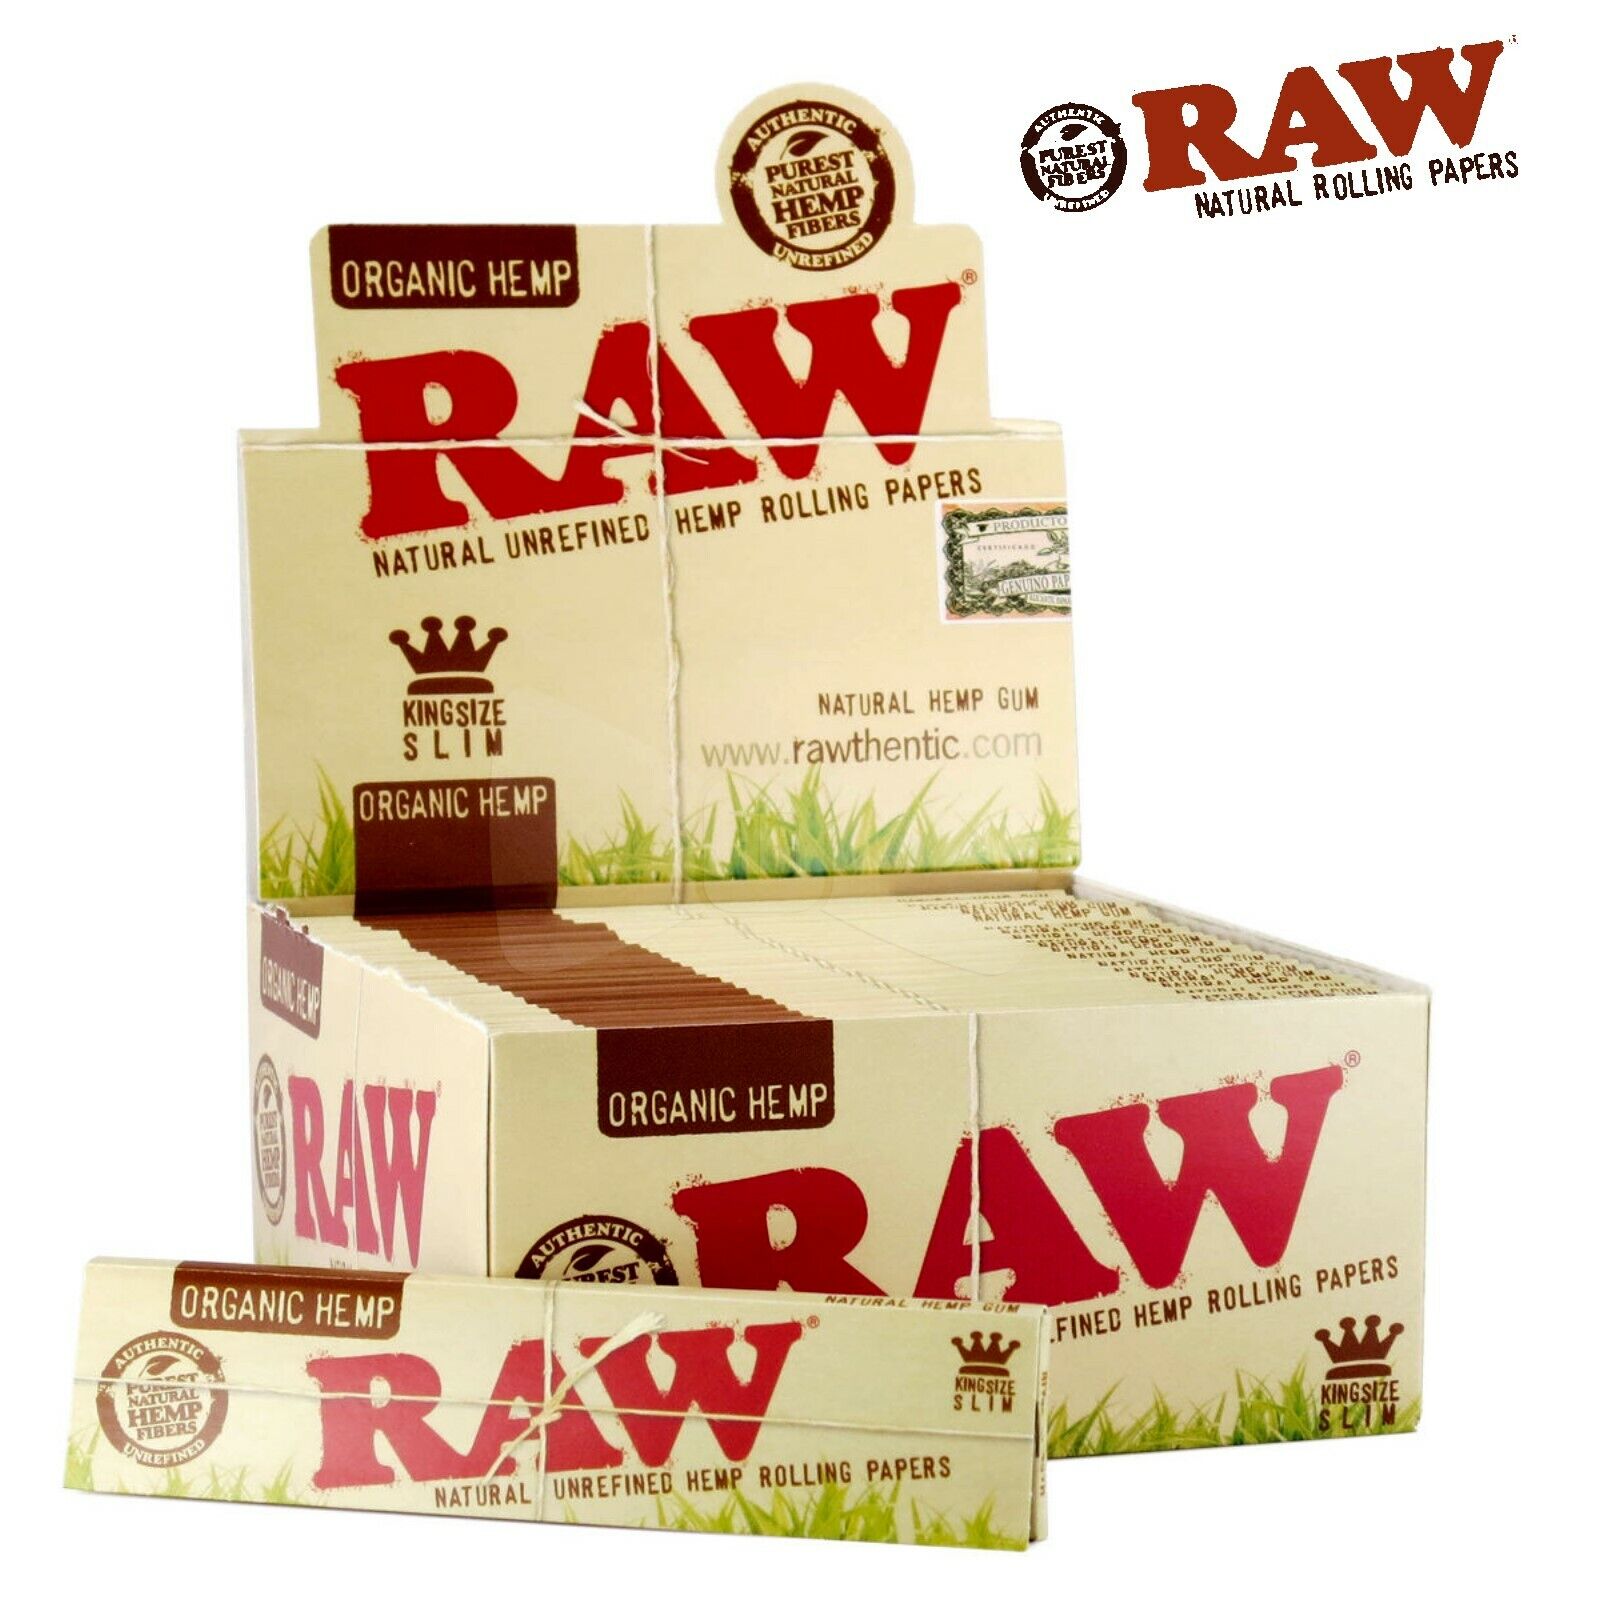 AUTHENTC Raw Organic King Size Slim Rolling Paper Full Box 50 pack, 32 Per Pack